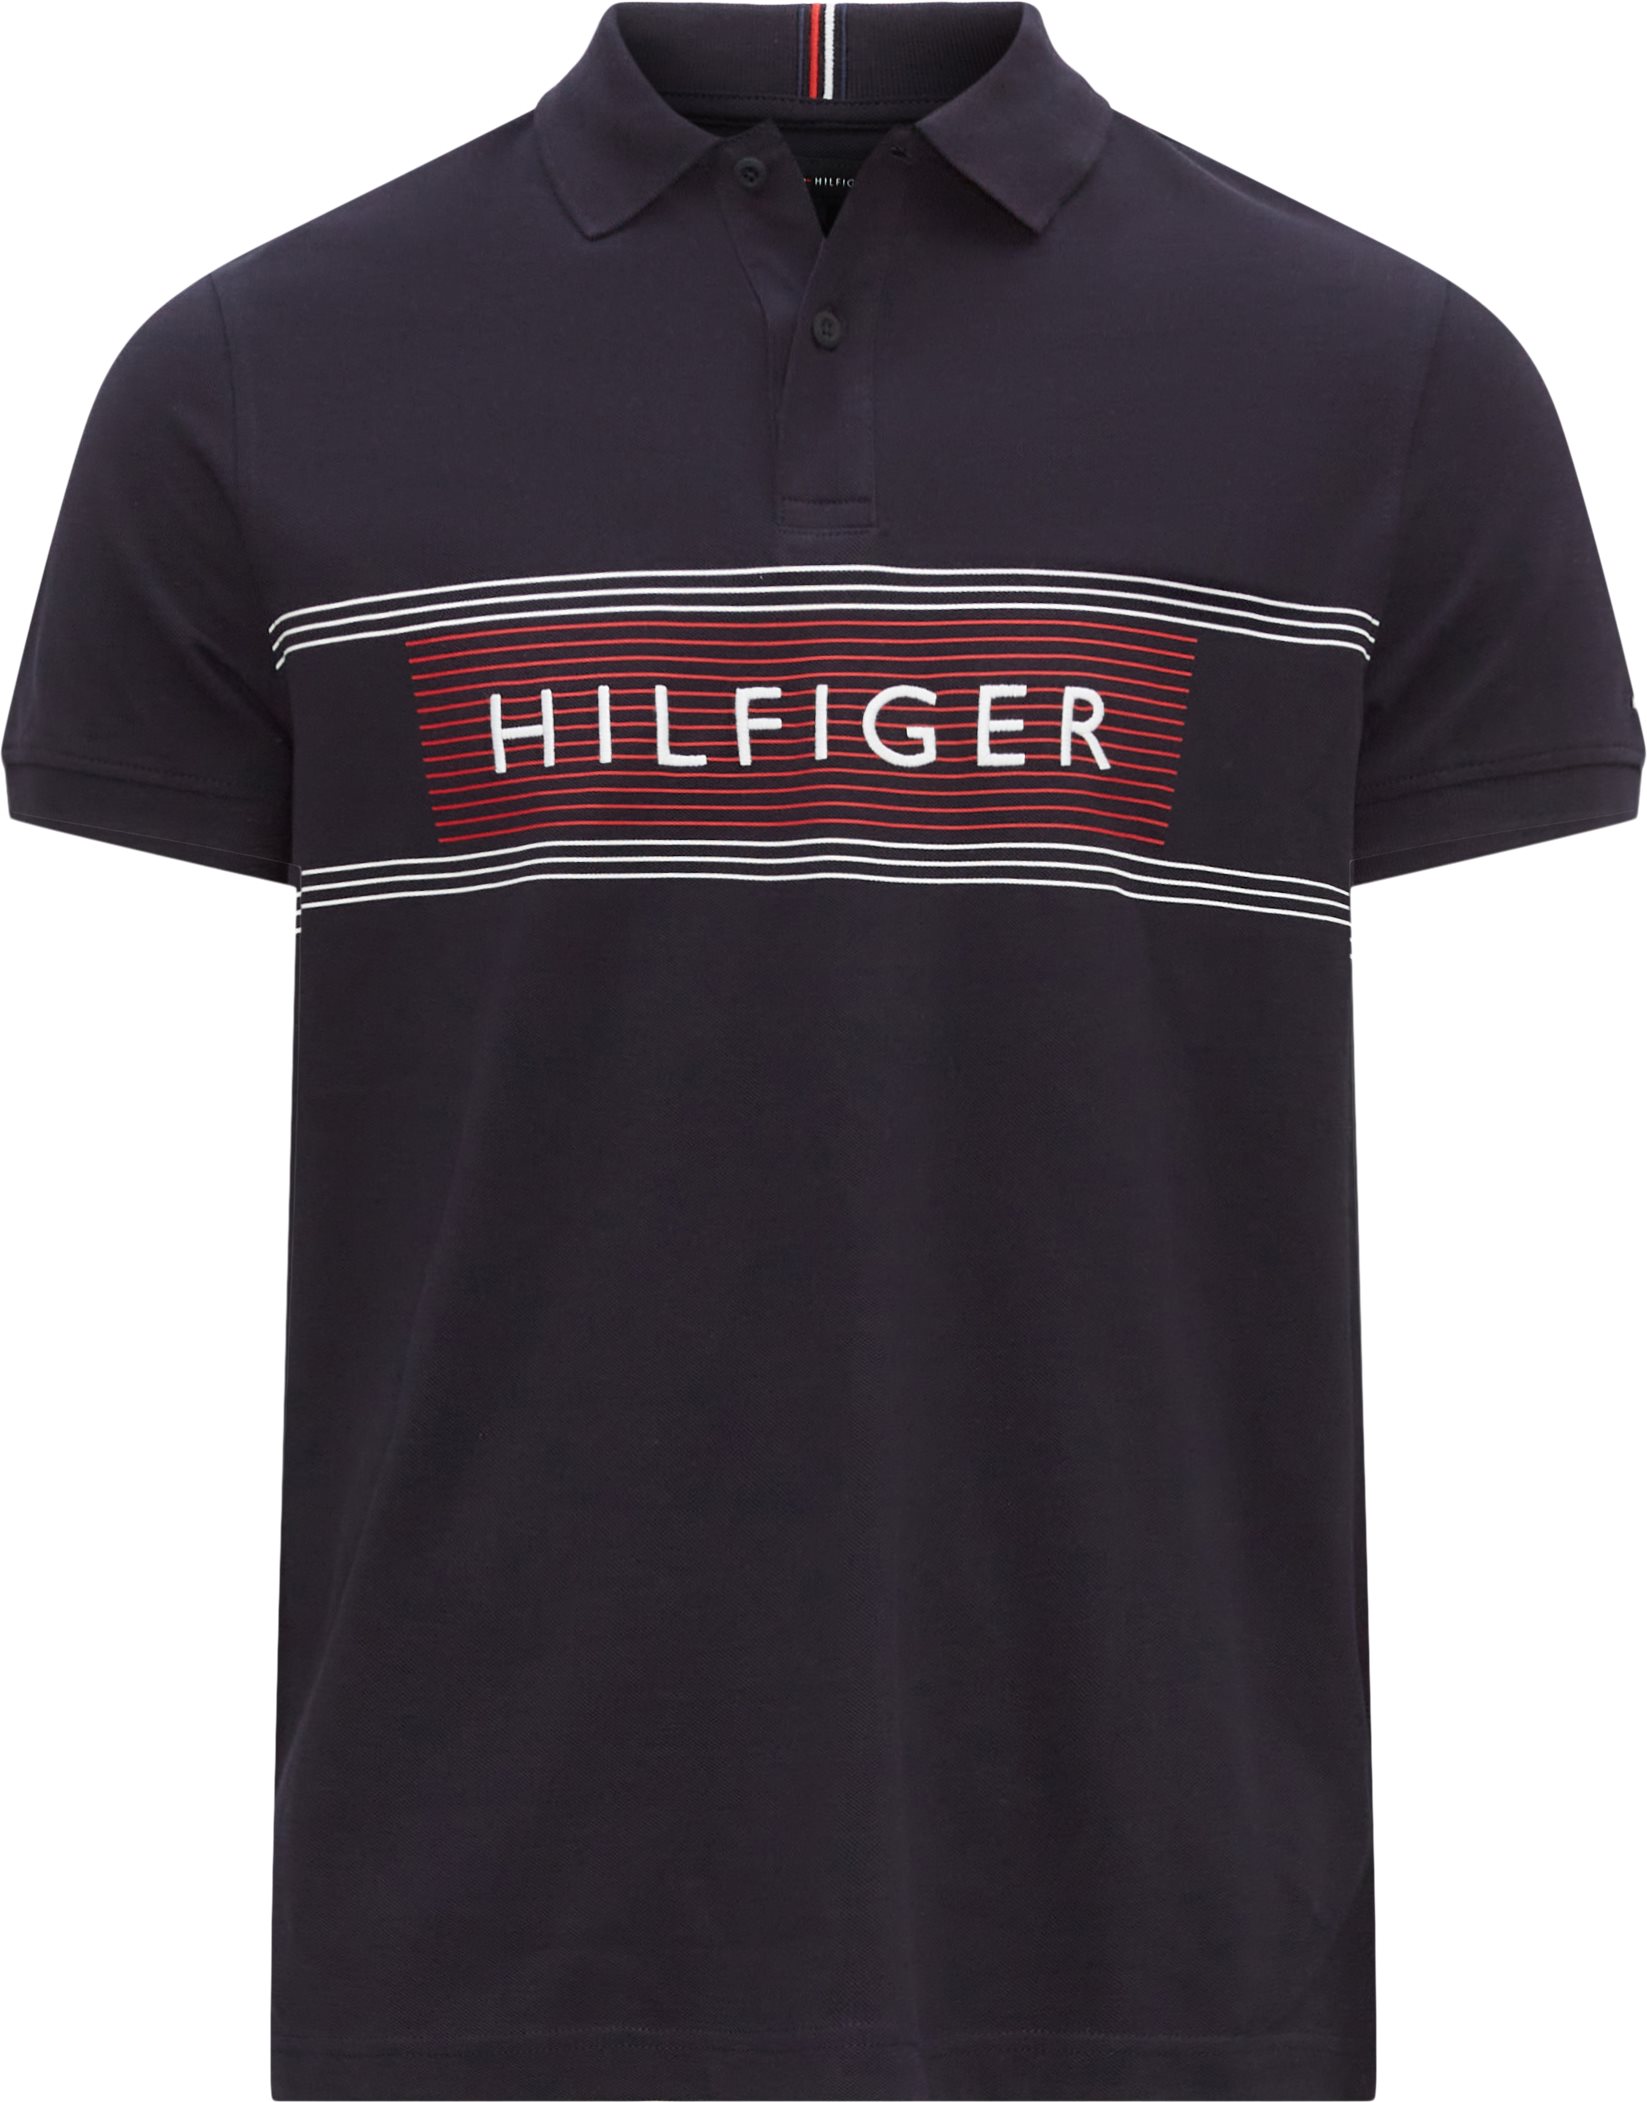 Hilfiger from EUR Tommy POLO RWB CHEST 30781 53 NAVY REG T-shirts